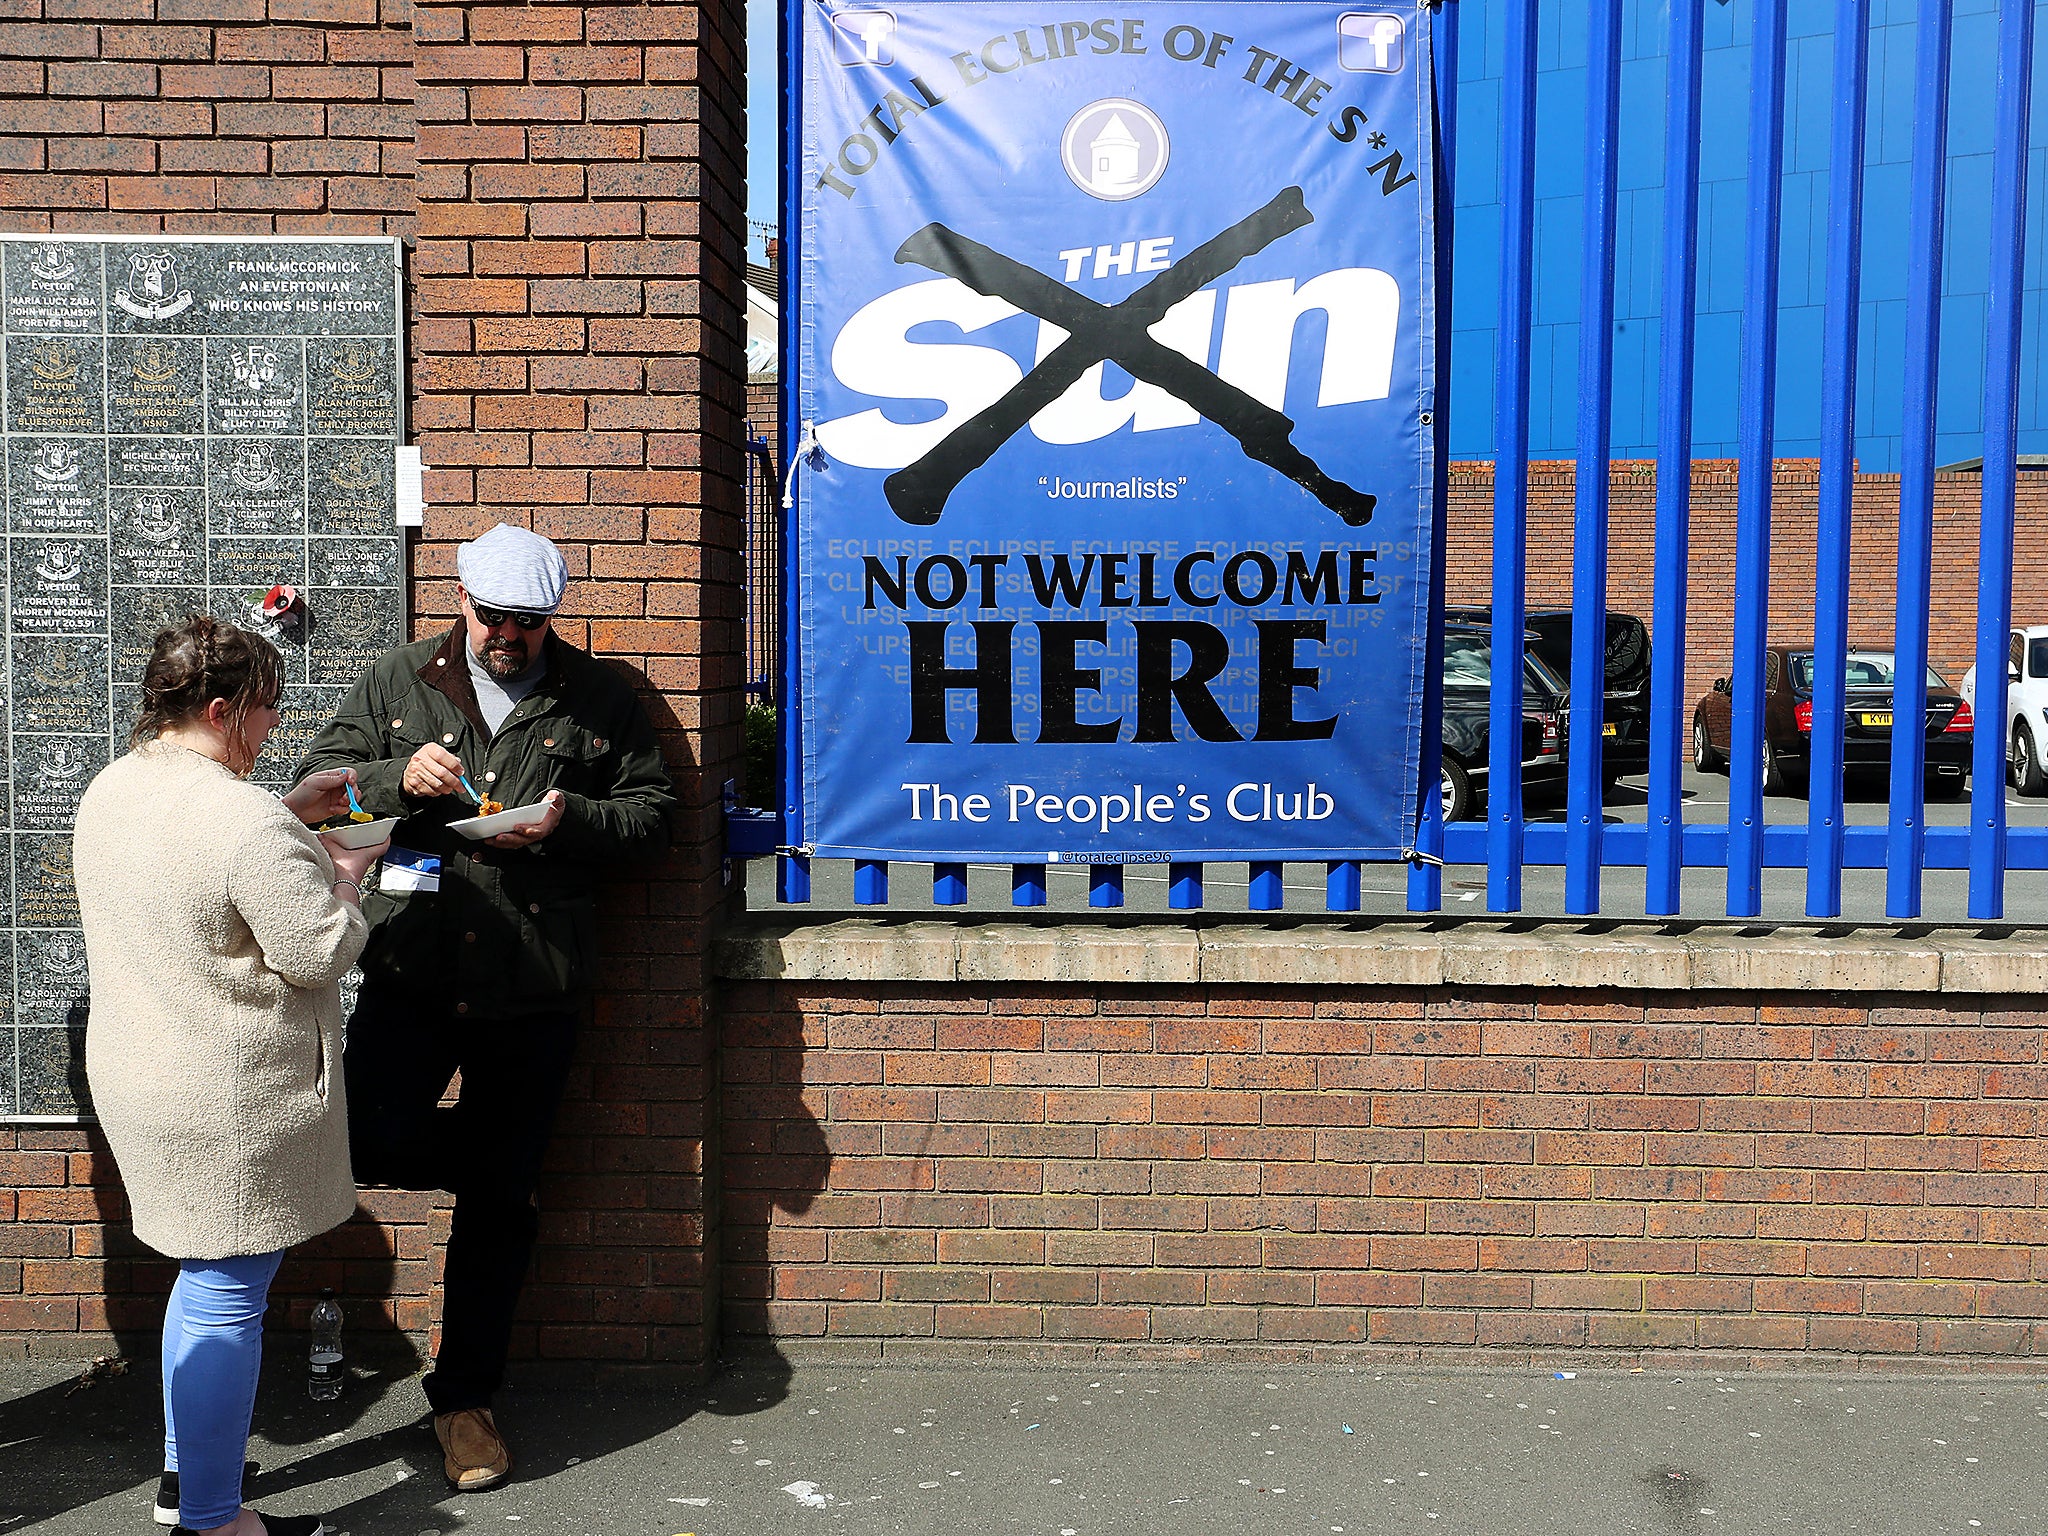 An anti-Sun sign outside Goodison Park, Everton's home ground